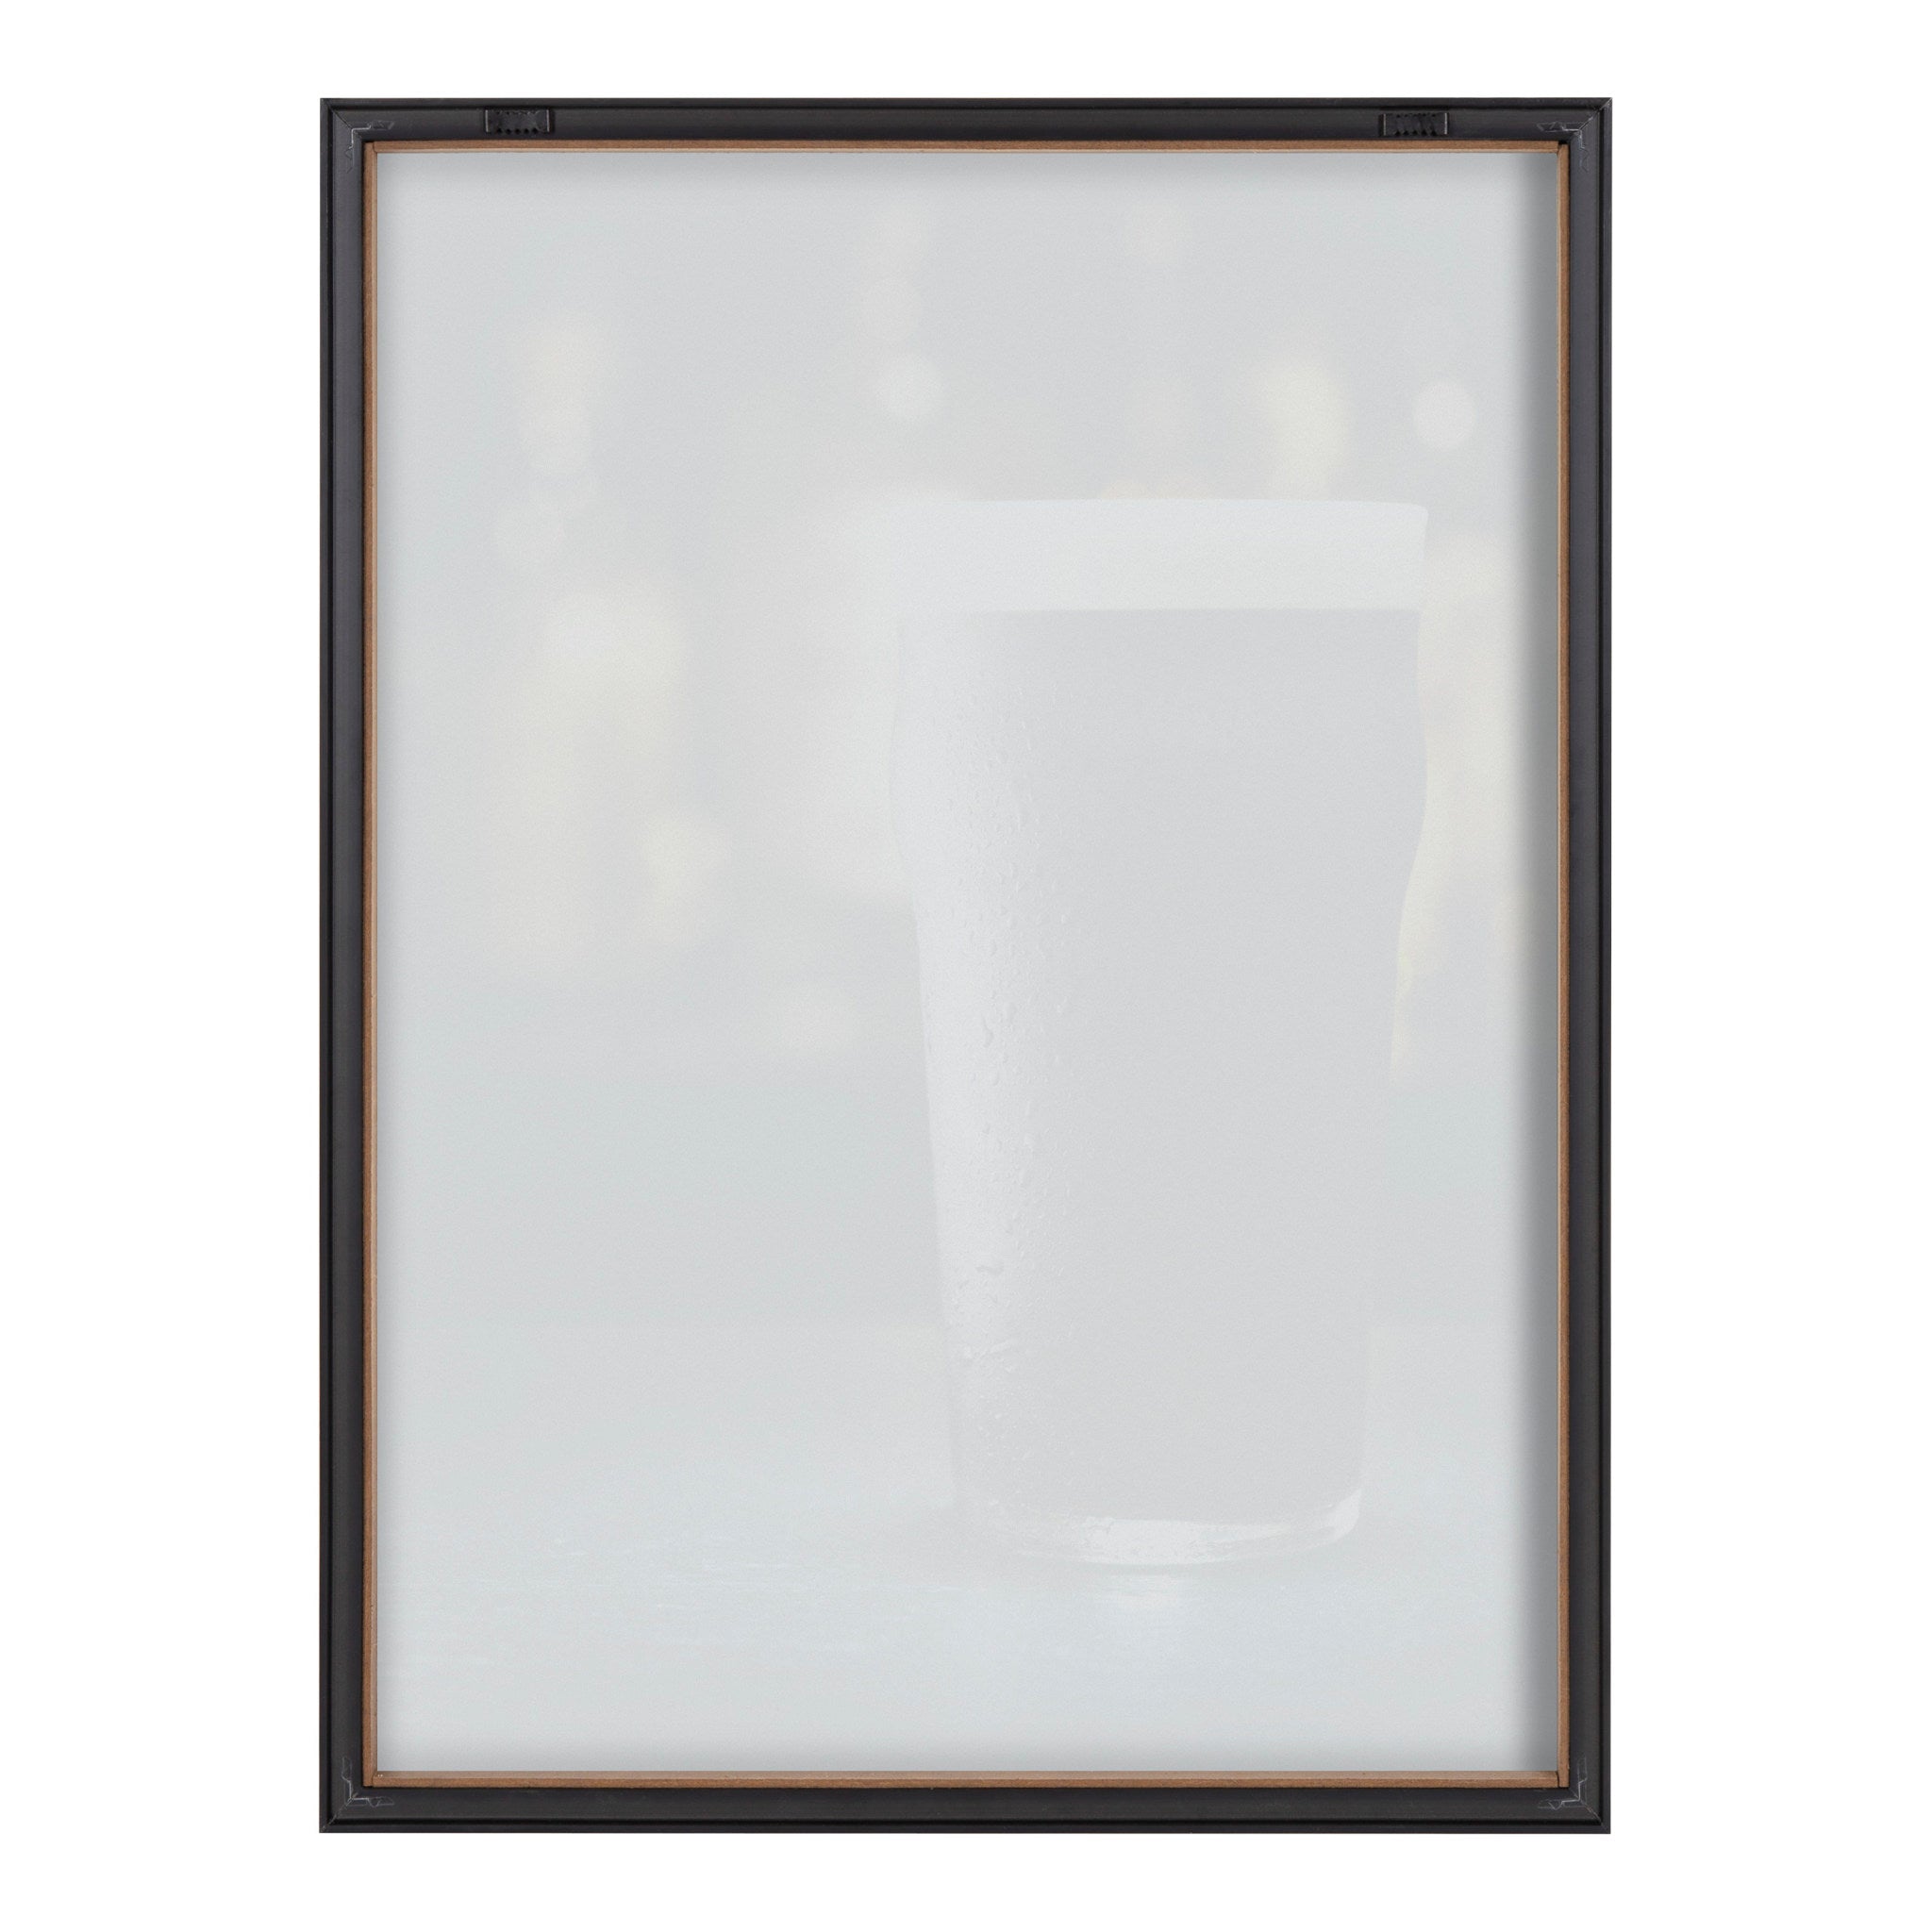 Blake Stout Framed Printed Glass by Emiko and Mark Franzen of F2Images